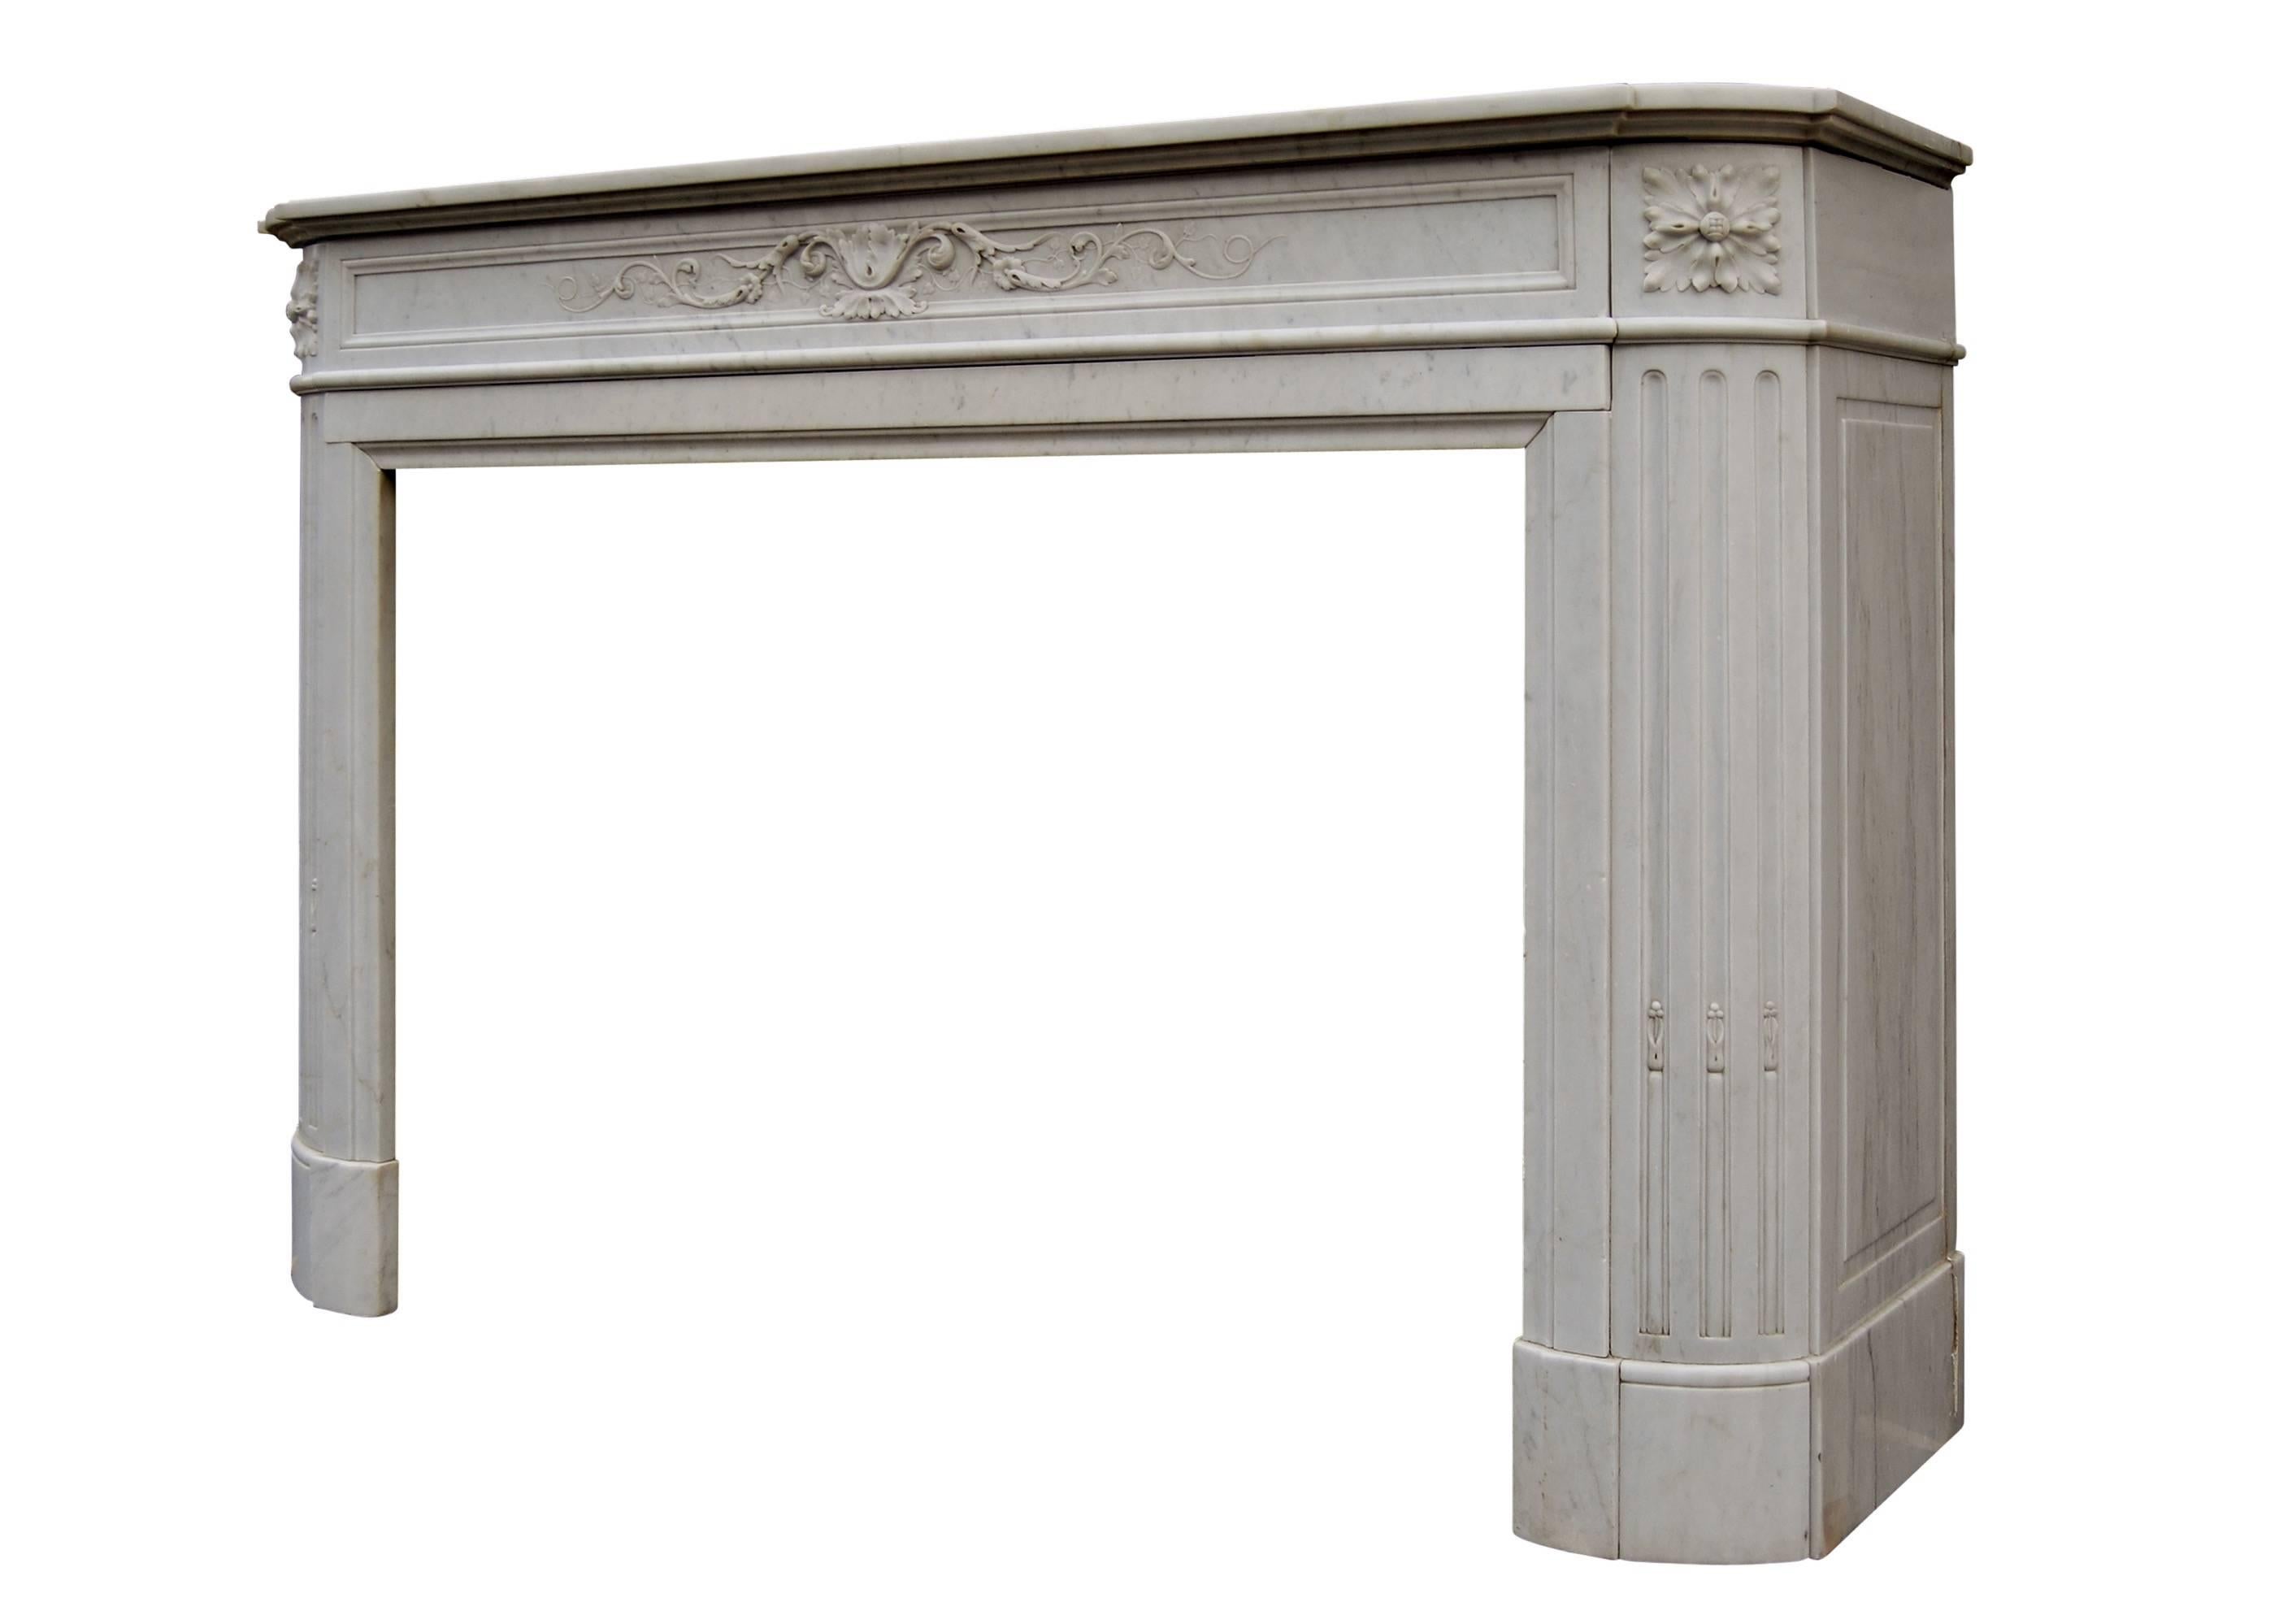 A 19th century French Louis XVI style Carrara marble fireplace with carved frieze of leaves and scrolls, demilune jambs with flutes surmounted by carved leaf paterae. Shaped shelf.

Measures: Shelf width - 1588 mm 62 ½ in
Overall height - 1092 mm